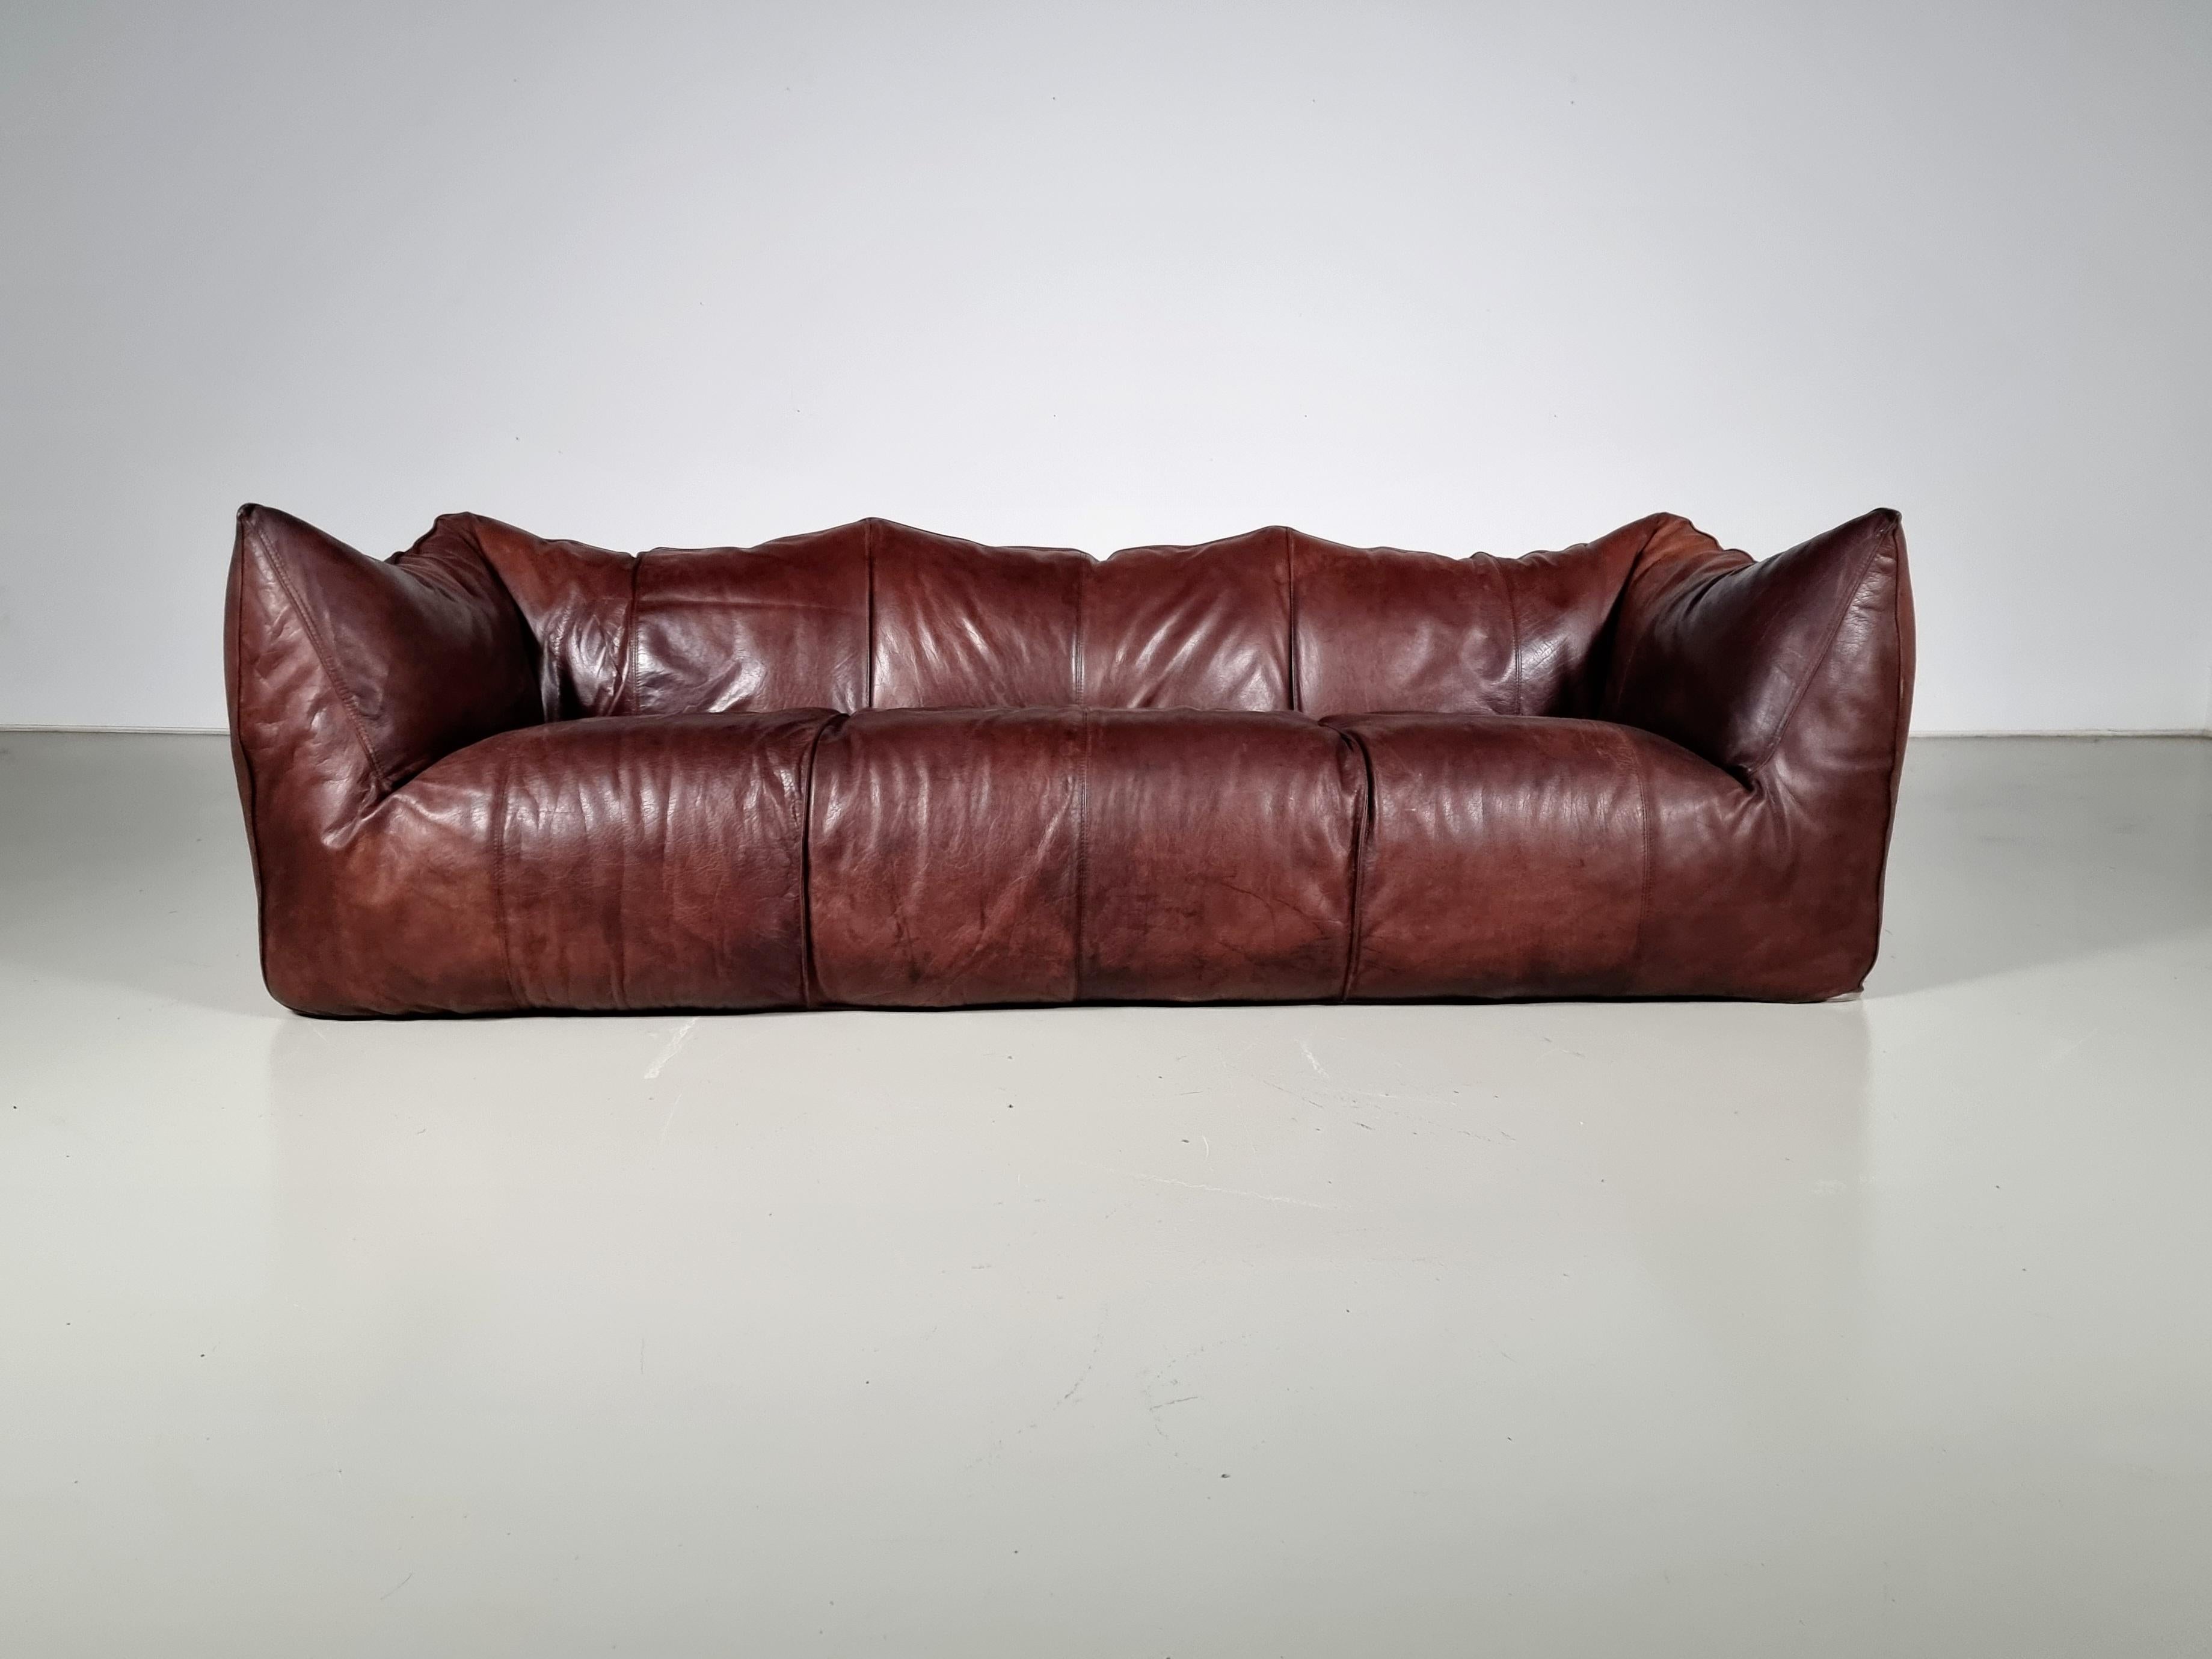 Le Bambole 3-seater sofa by Mario Bellini for C&B Italia, the 1970s. An iconic piece of Italian design. It was awarded the 1979 'Compasso d'Oro award. An example of Le Bambole is included in MoMA's permanent collection. It has the original brown